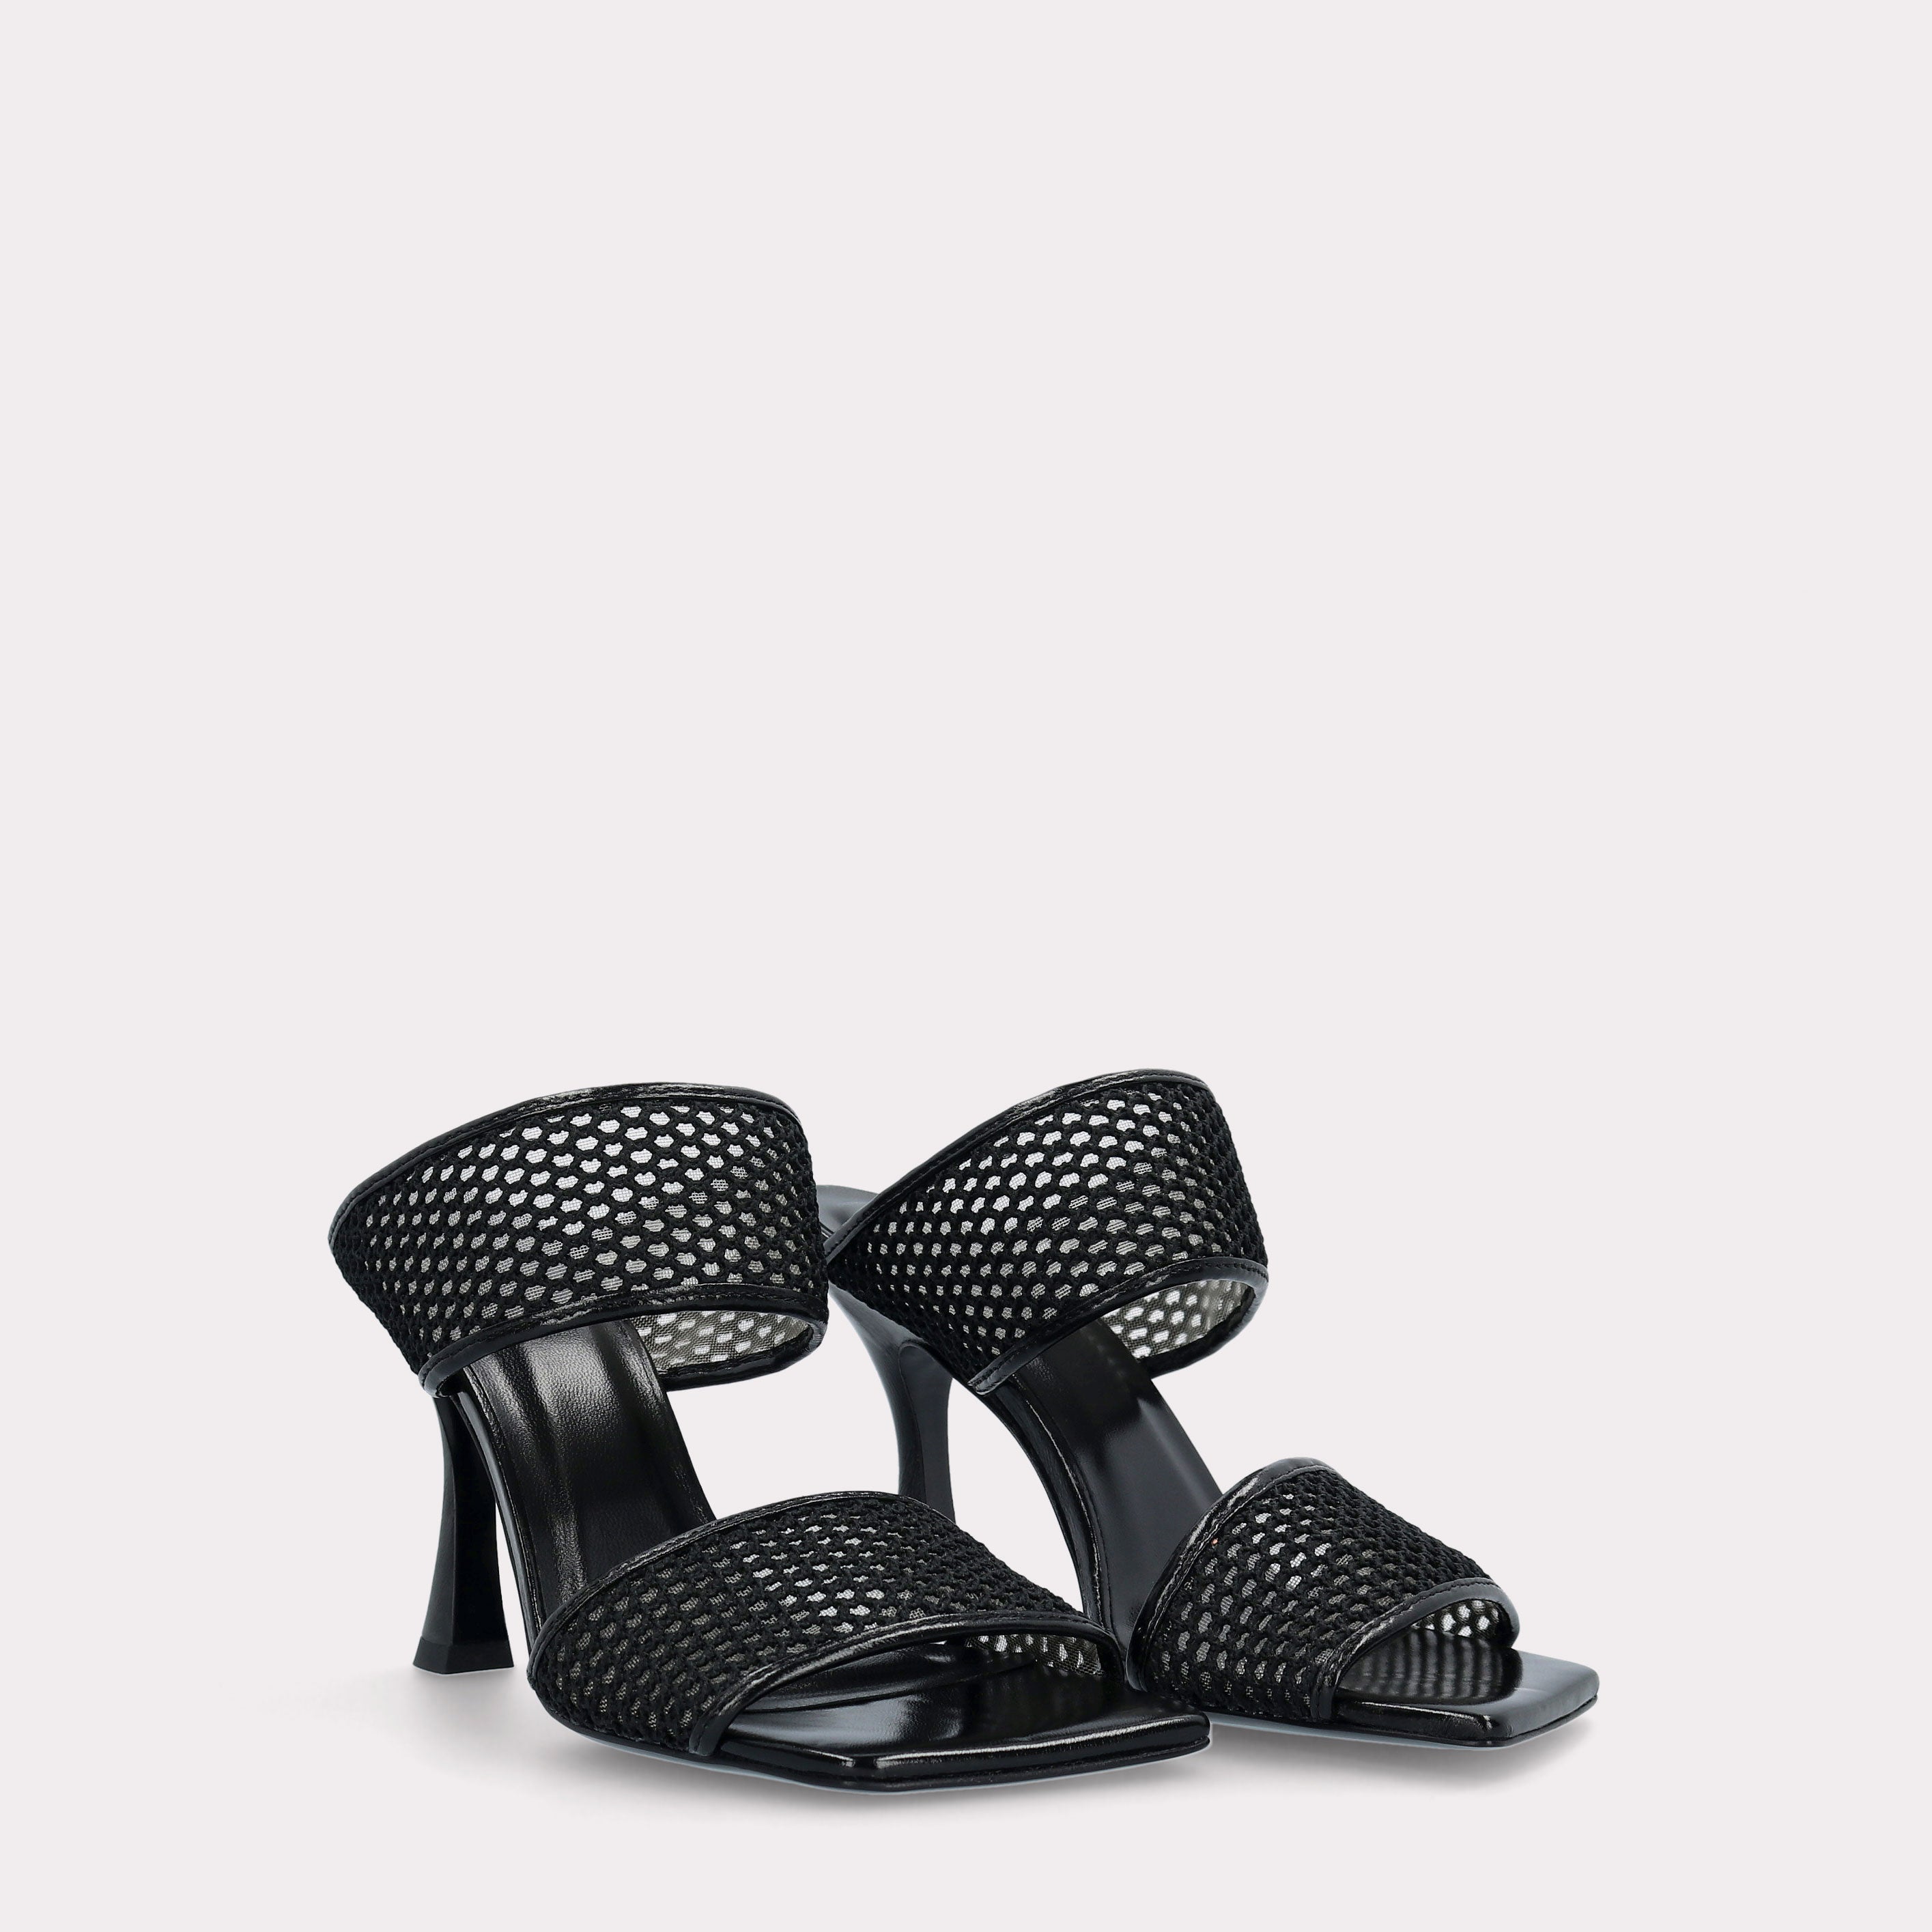 BETTY 21 BLACK MESH AND BLACK LEATHER SANDALS